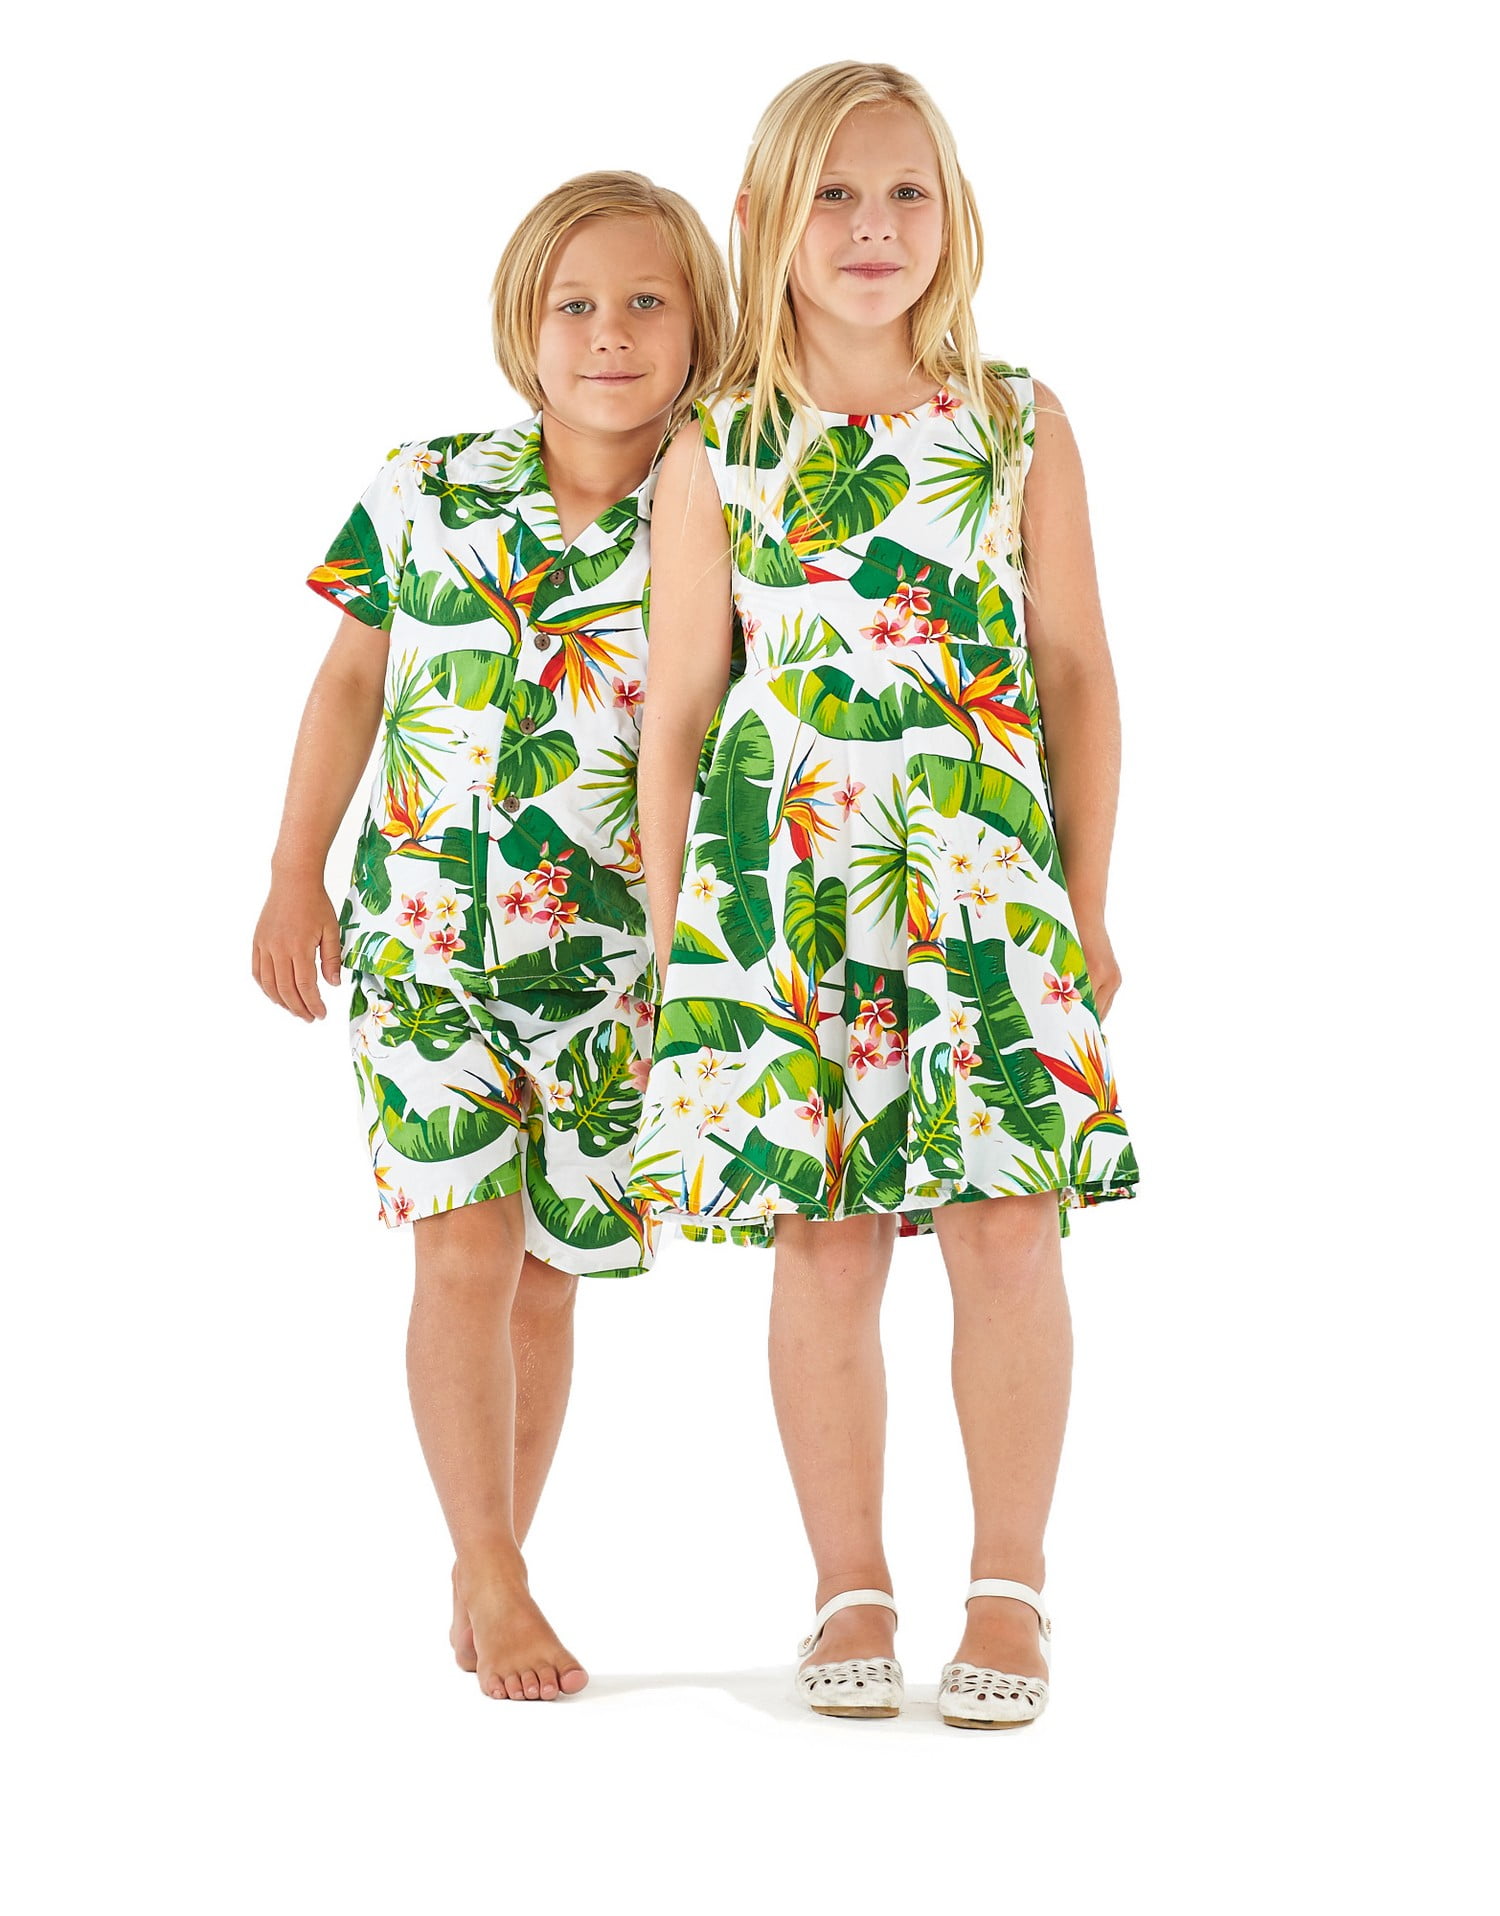 Matching Boy and Girl Siblings Hawaiian Luau Outfits in Various Patterns -  